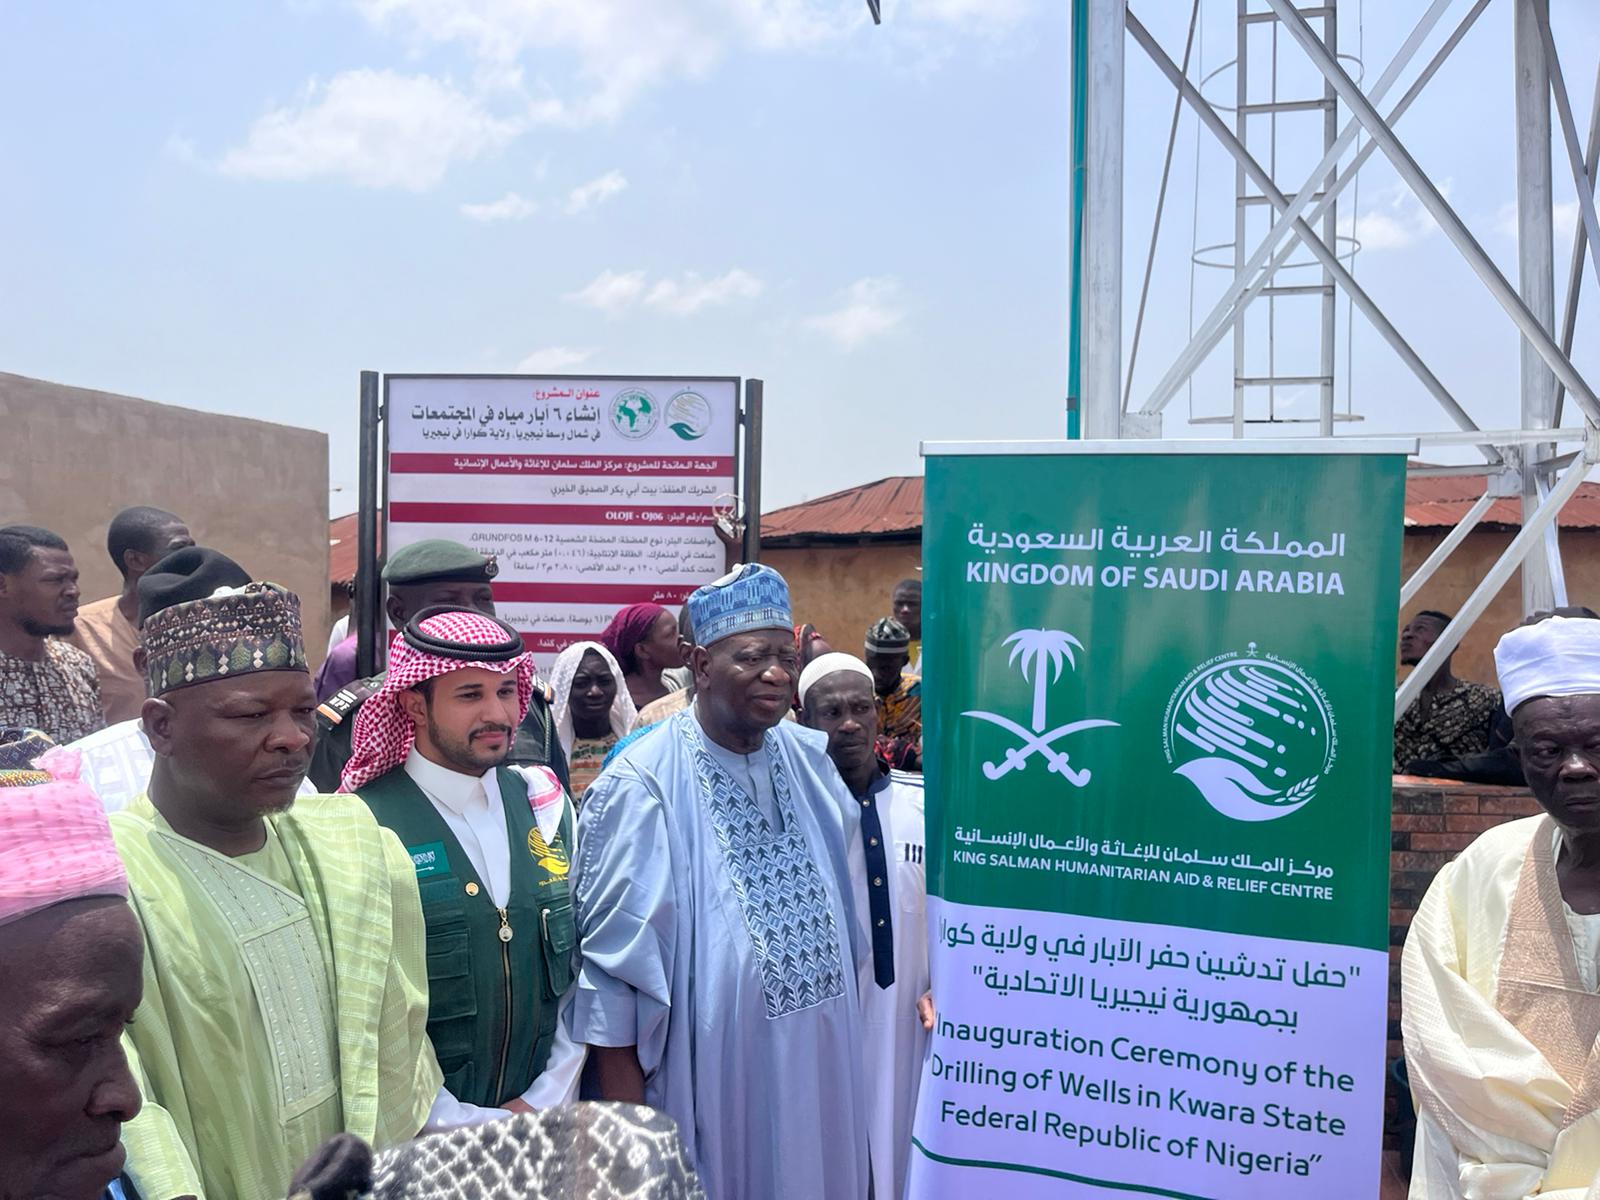 King Salman Humanitarian Aid & Relief Centre and Abibakr As-Sidiq Philanthropic Home Commission Solar-Powered Borehole Project in Kwara State, Nigeria